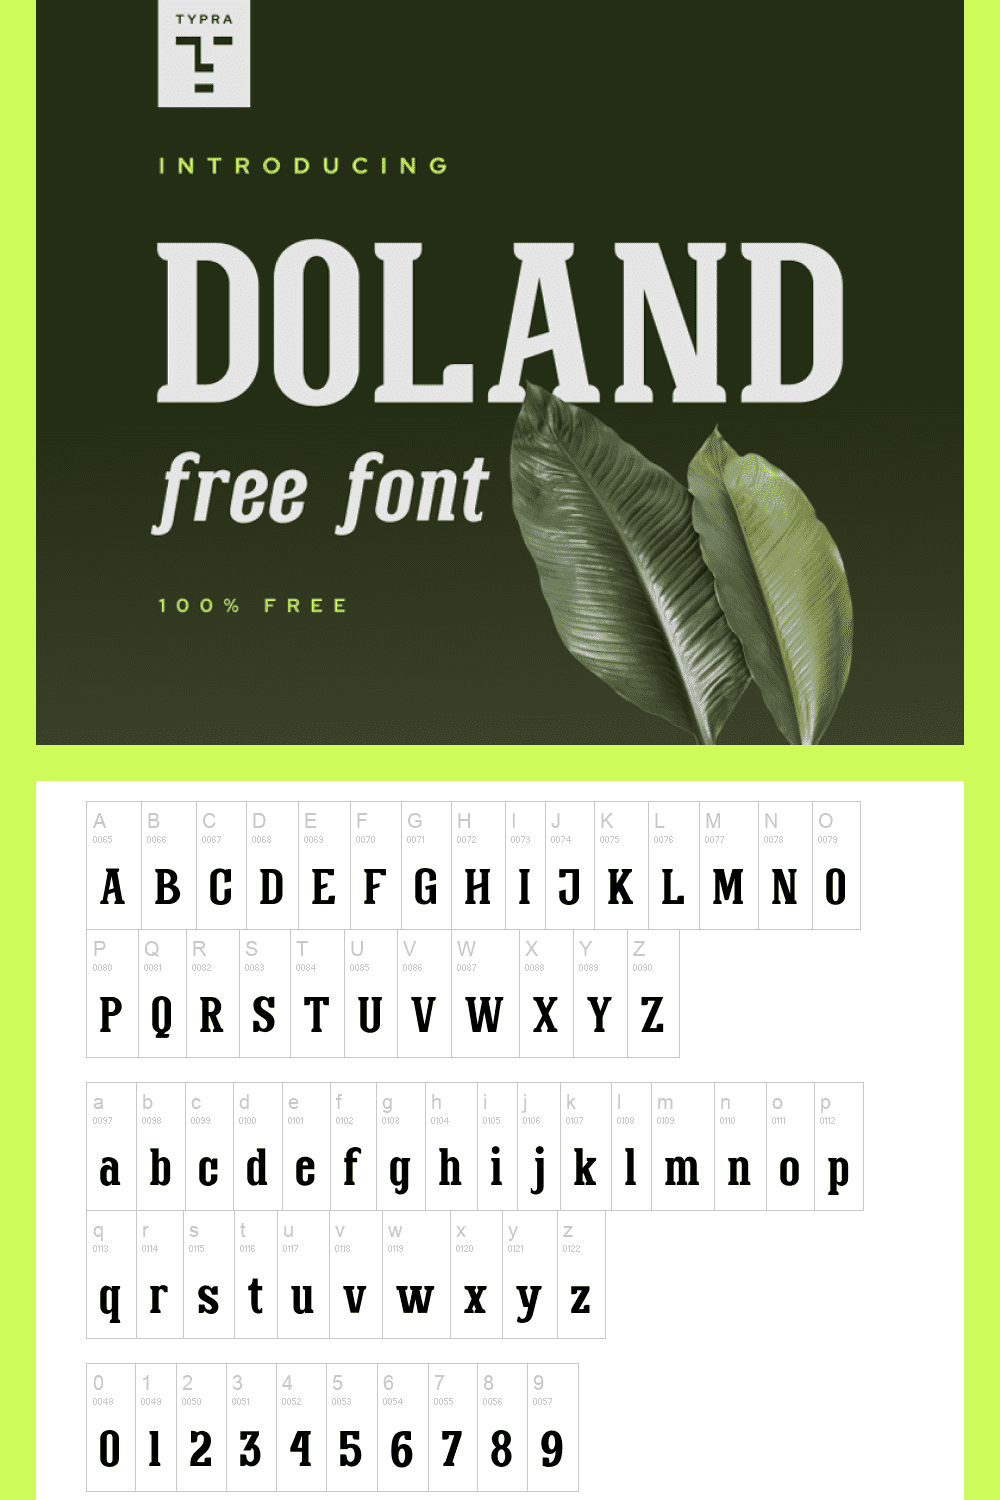 Fresh, Indonesian font in green.